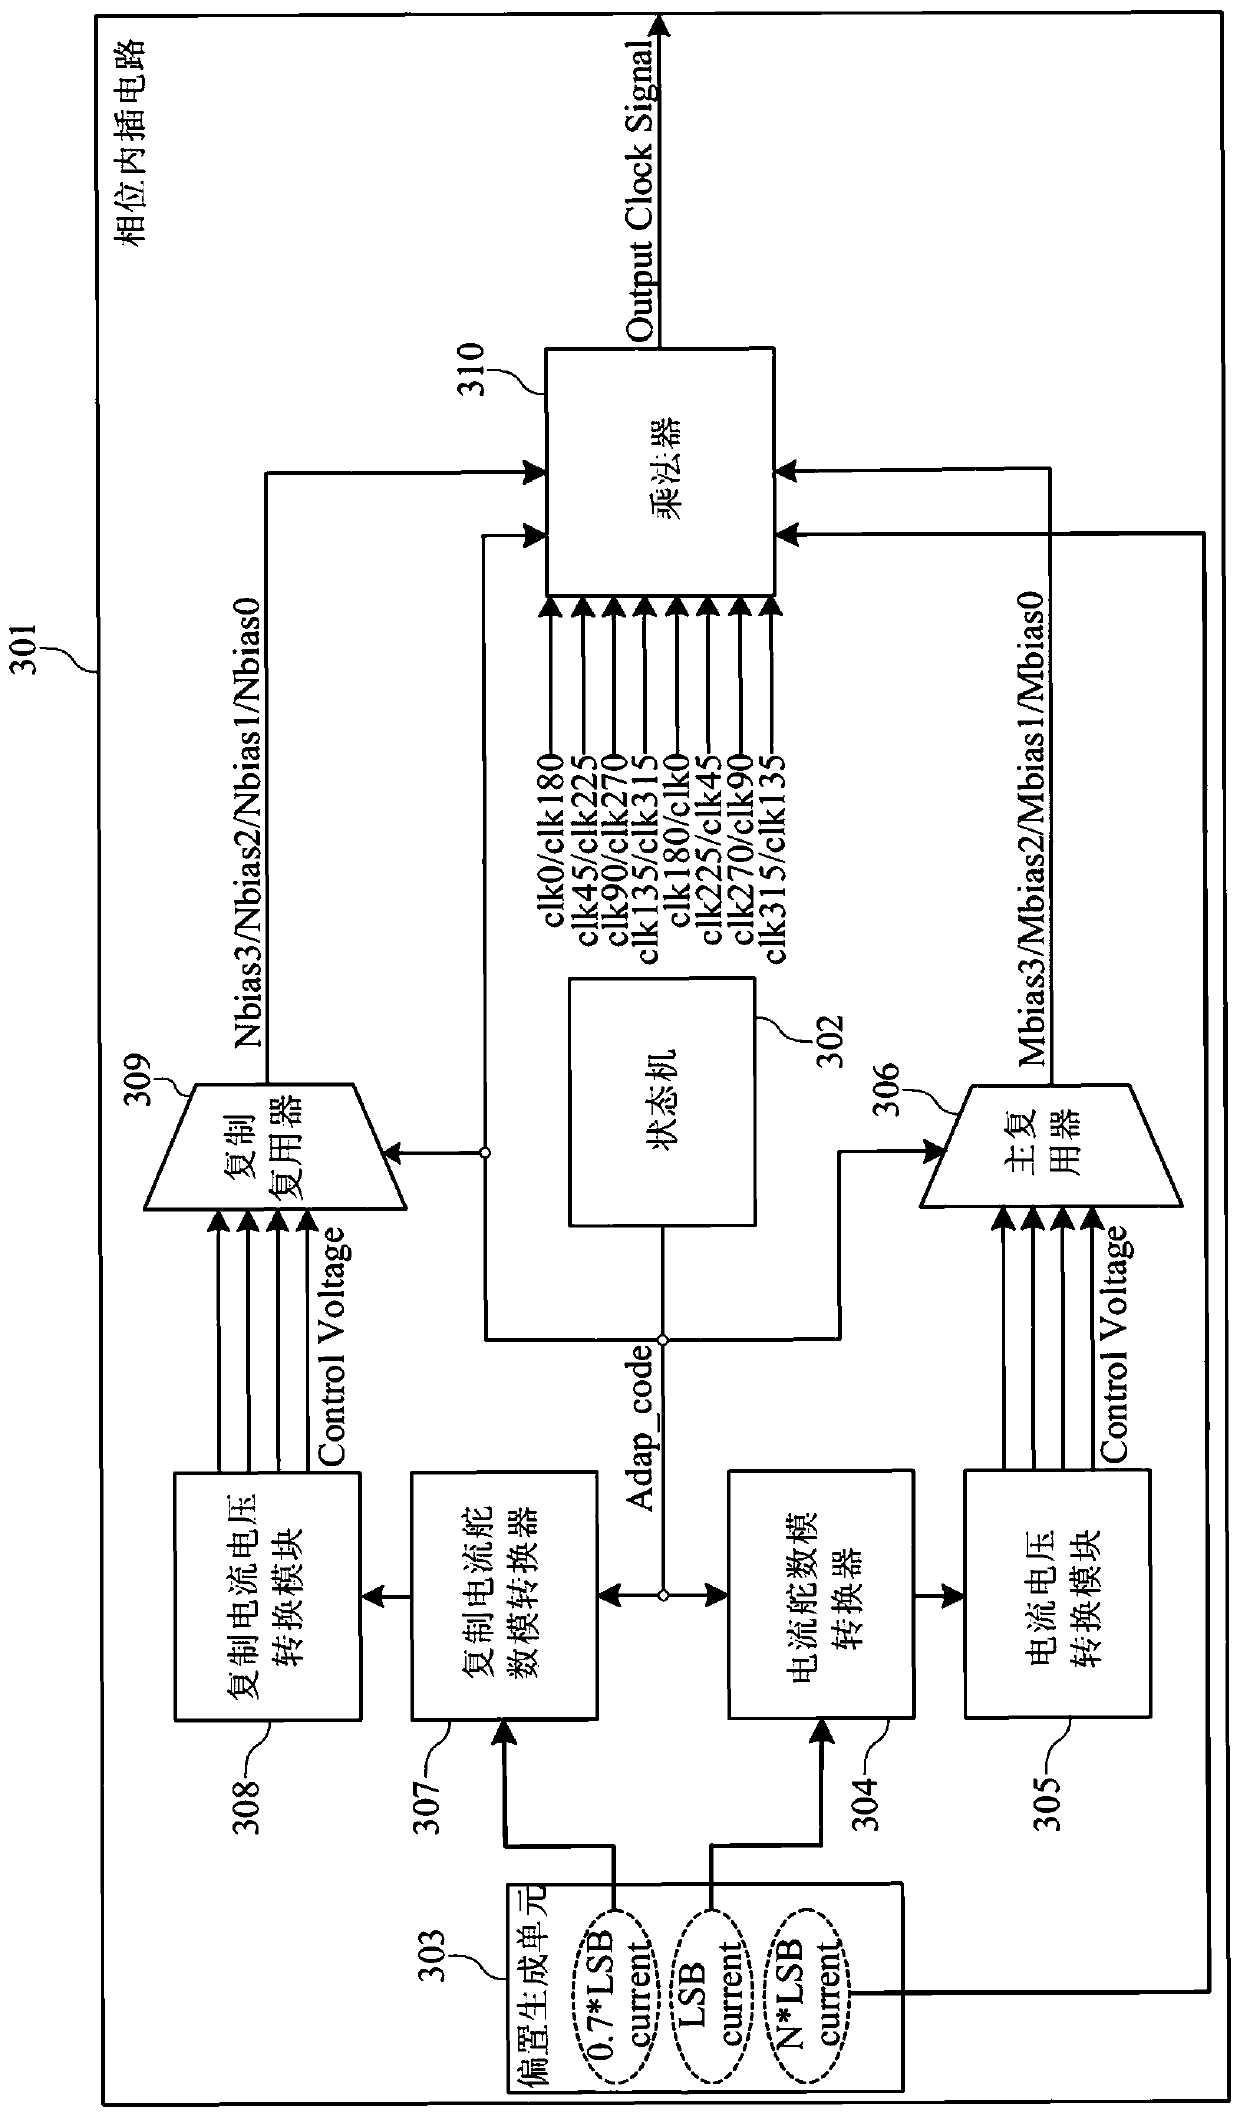 High-linearity and low-voltage phase interpolating circuit